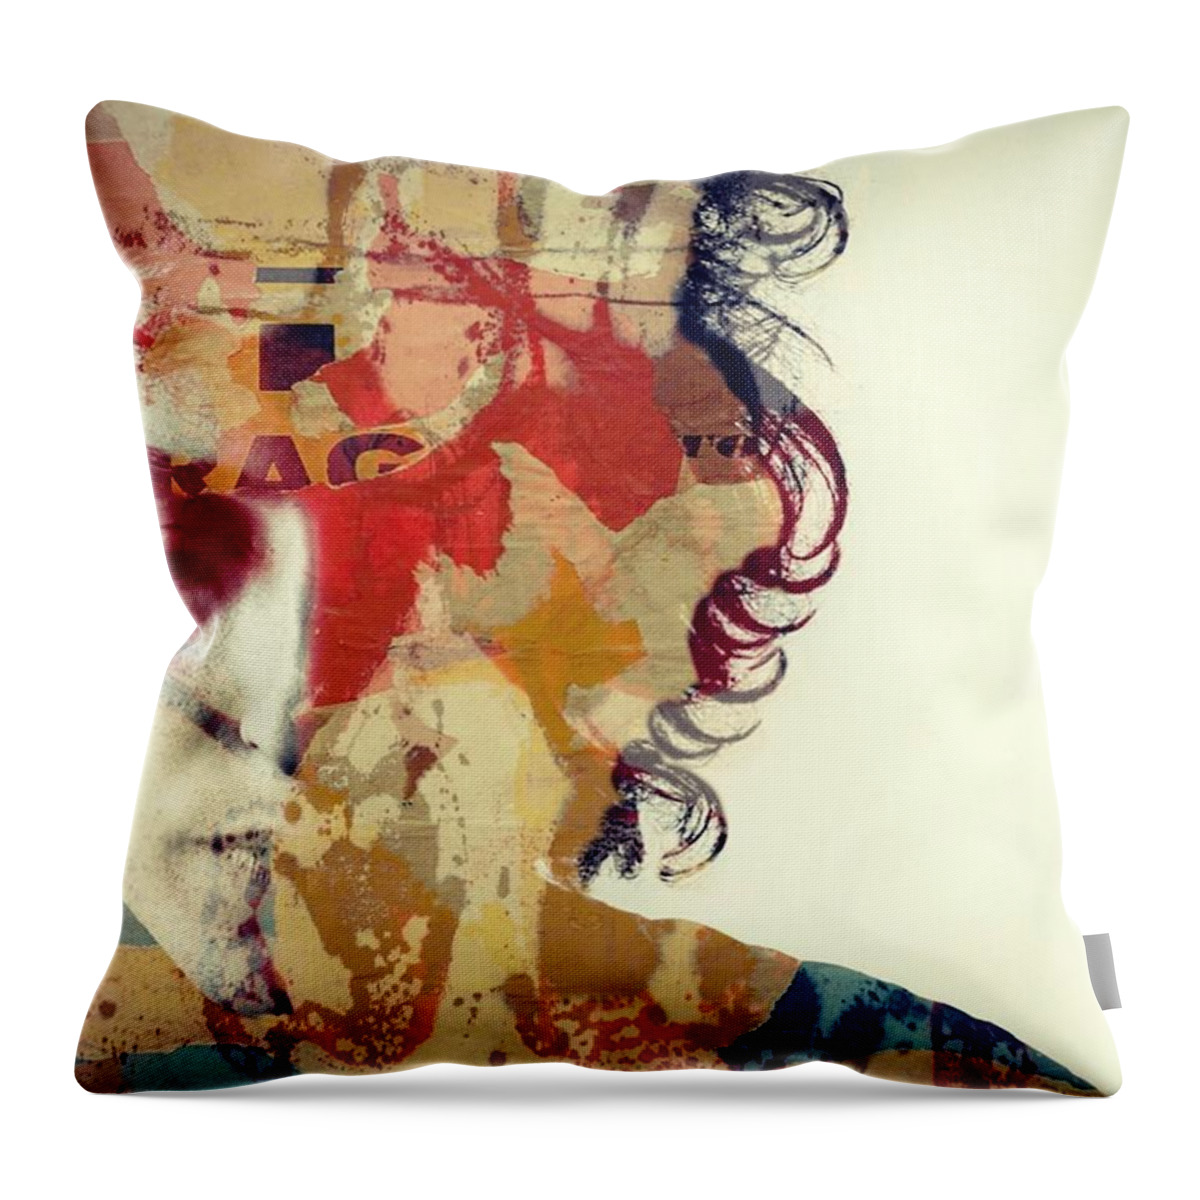 Bob Dylan Digital Throw Pillow featuring the digital art I'll Be Your Baby Tonight by Paul Lovering